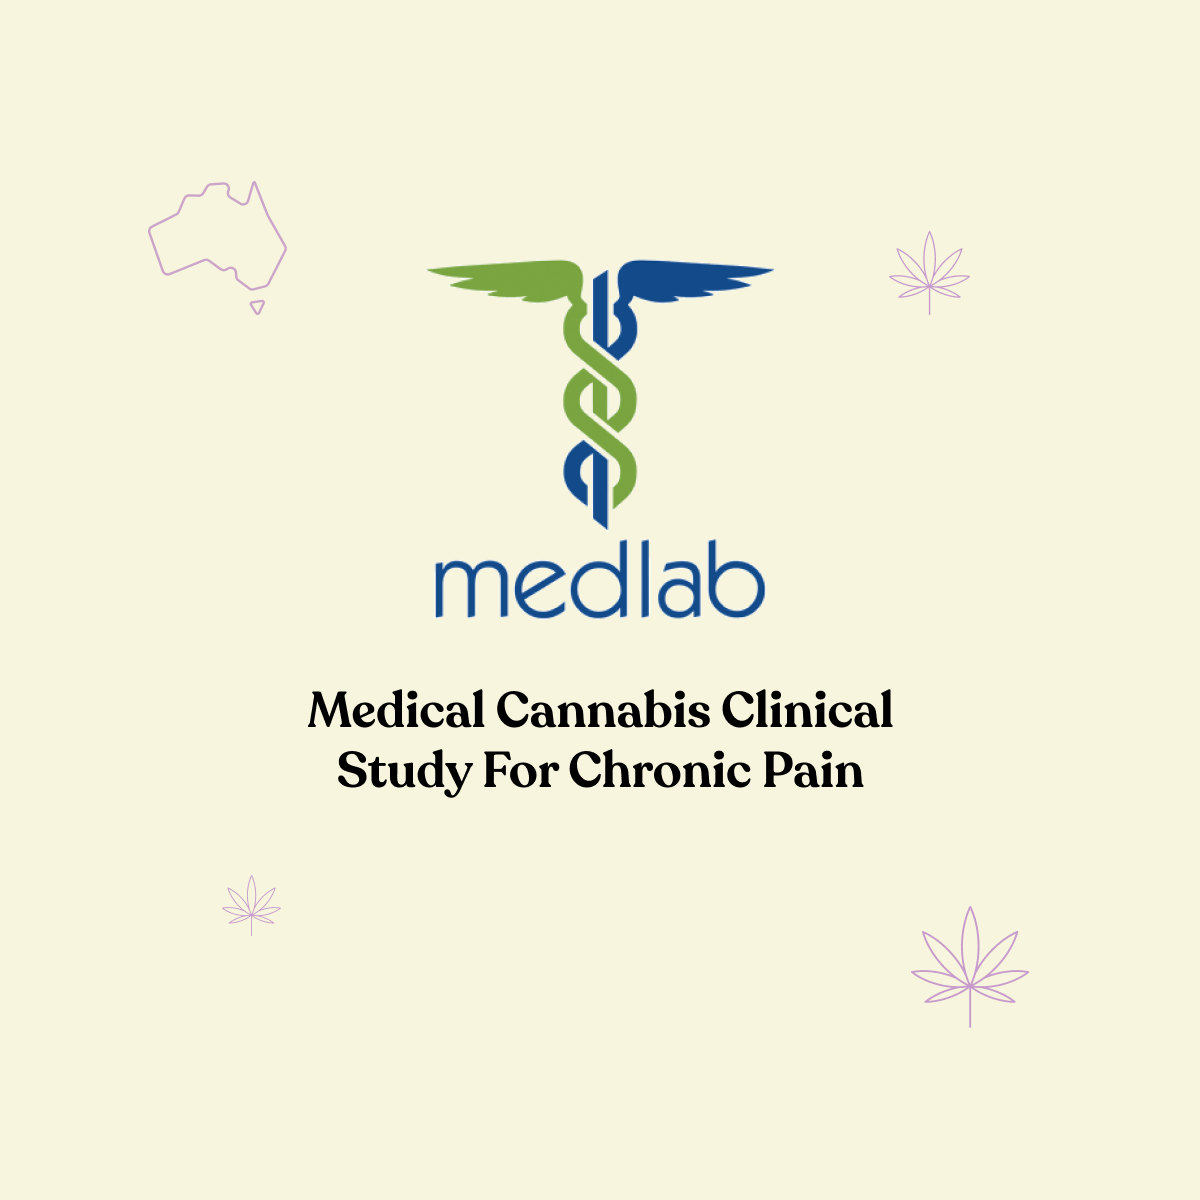 #MedicinalCannabis & cancer or non-cancer related #ChronicPain study now recruiting. We spoke with @medlabclinical's clinical research coordinator about the trial and how patients can get involved. Learn more here: honahlee.com.au/articles/canna…